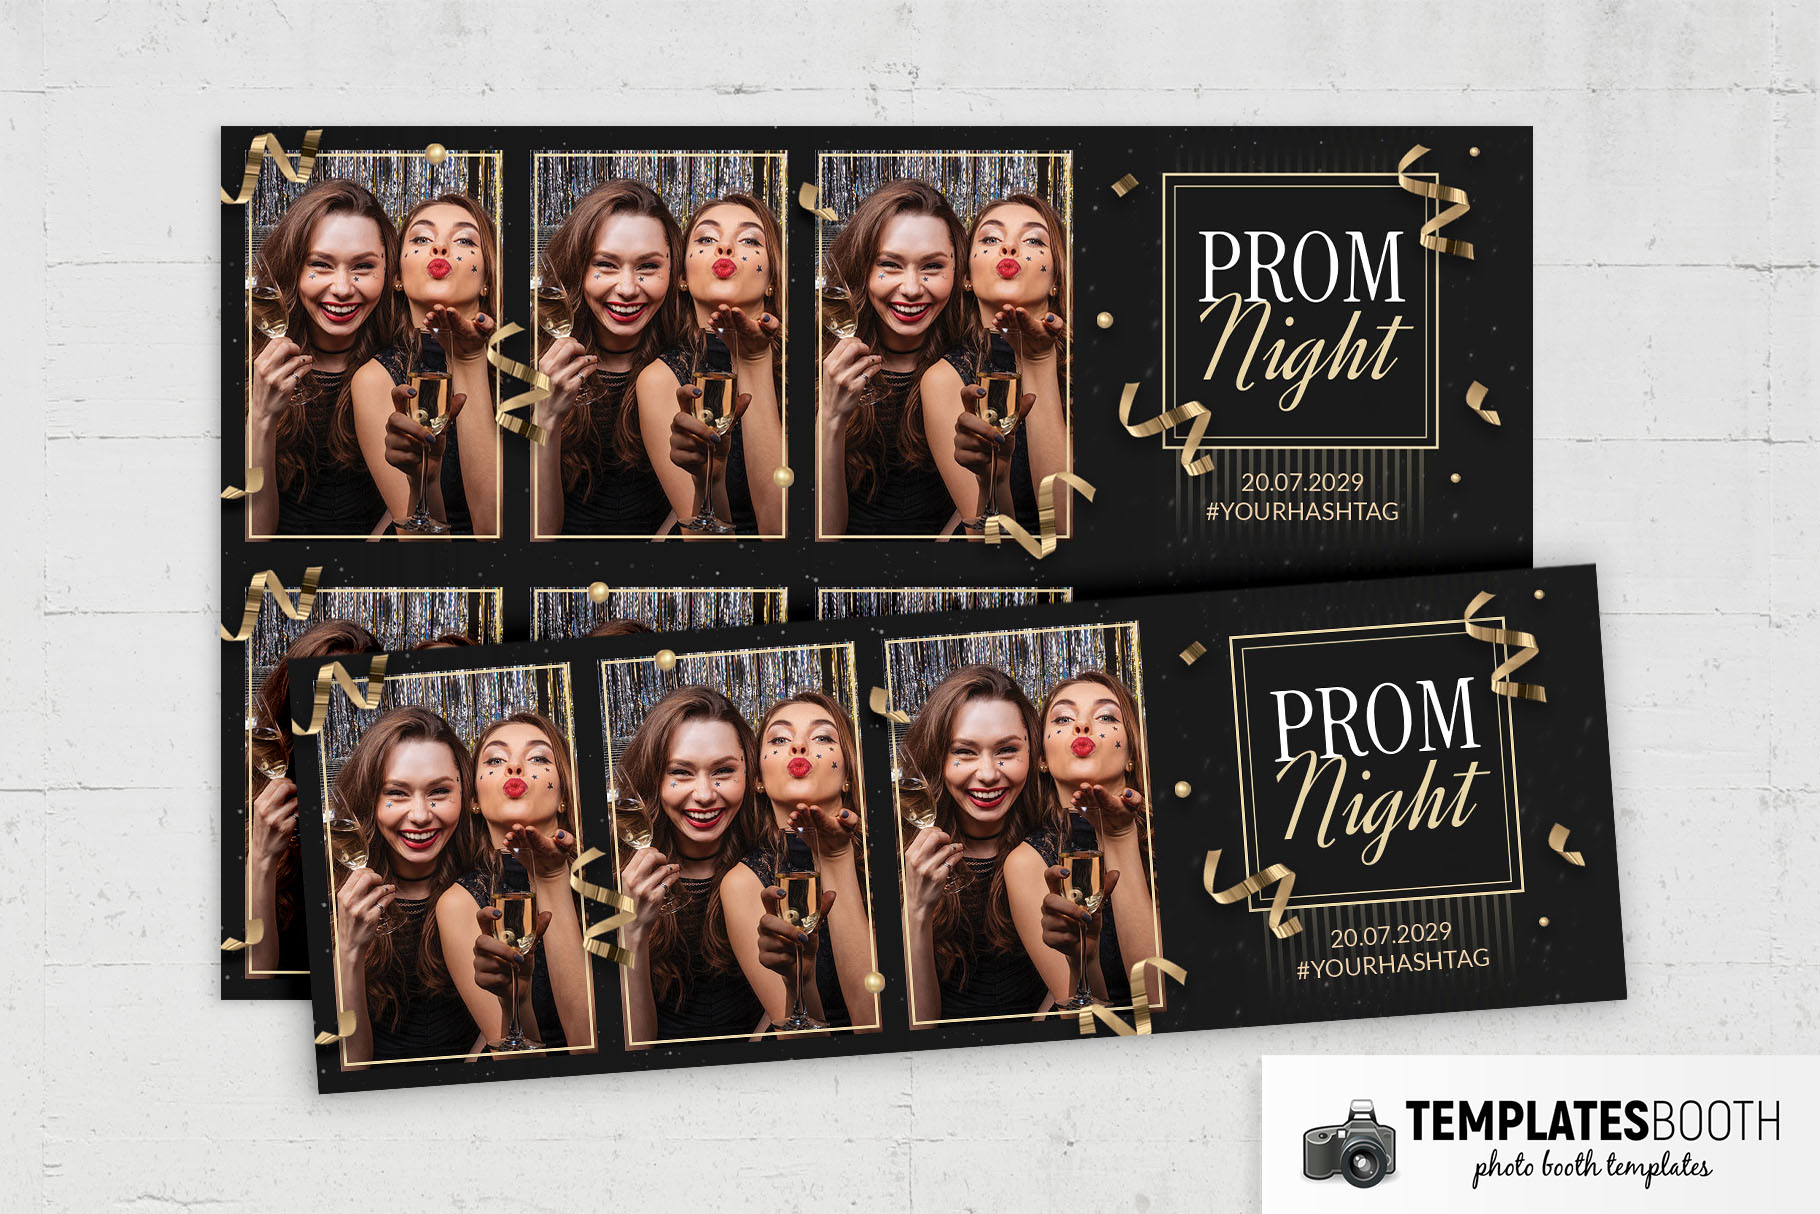 Prom Night Photo Booth Template